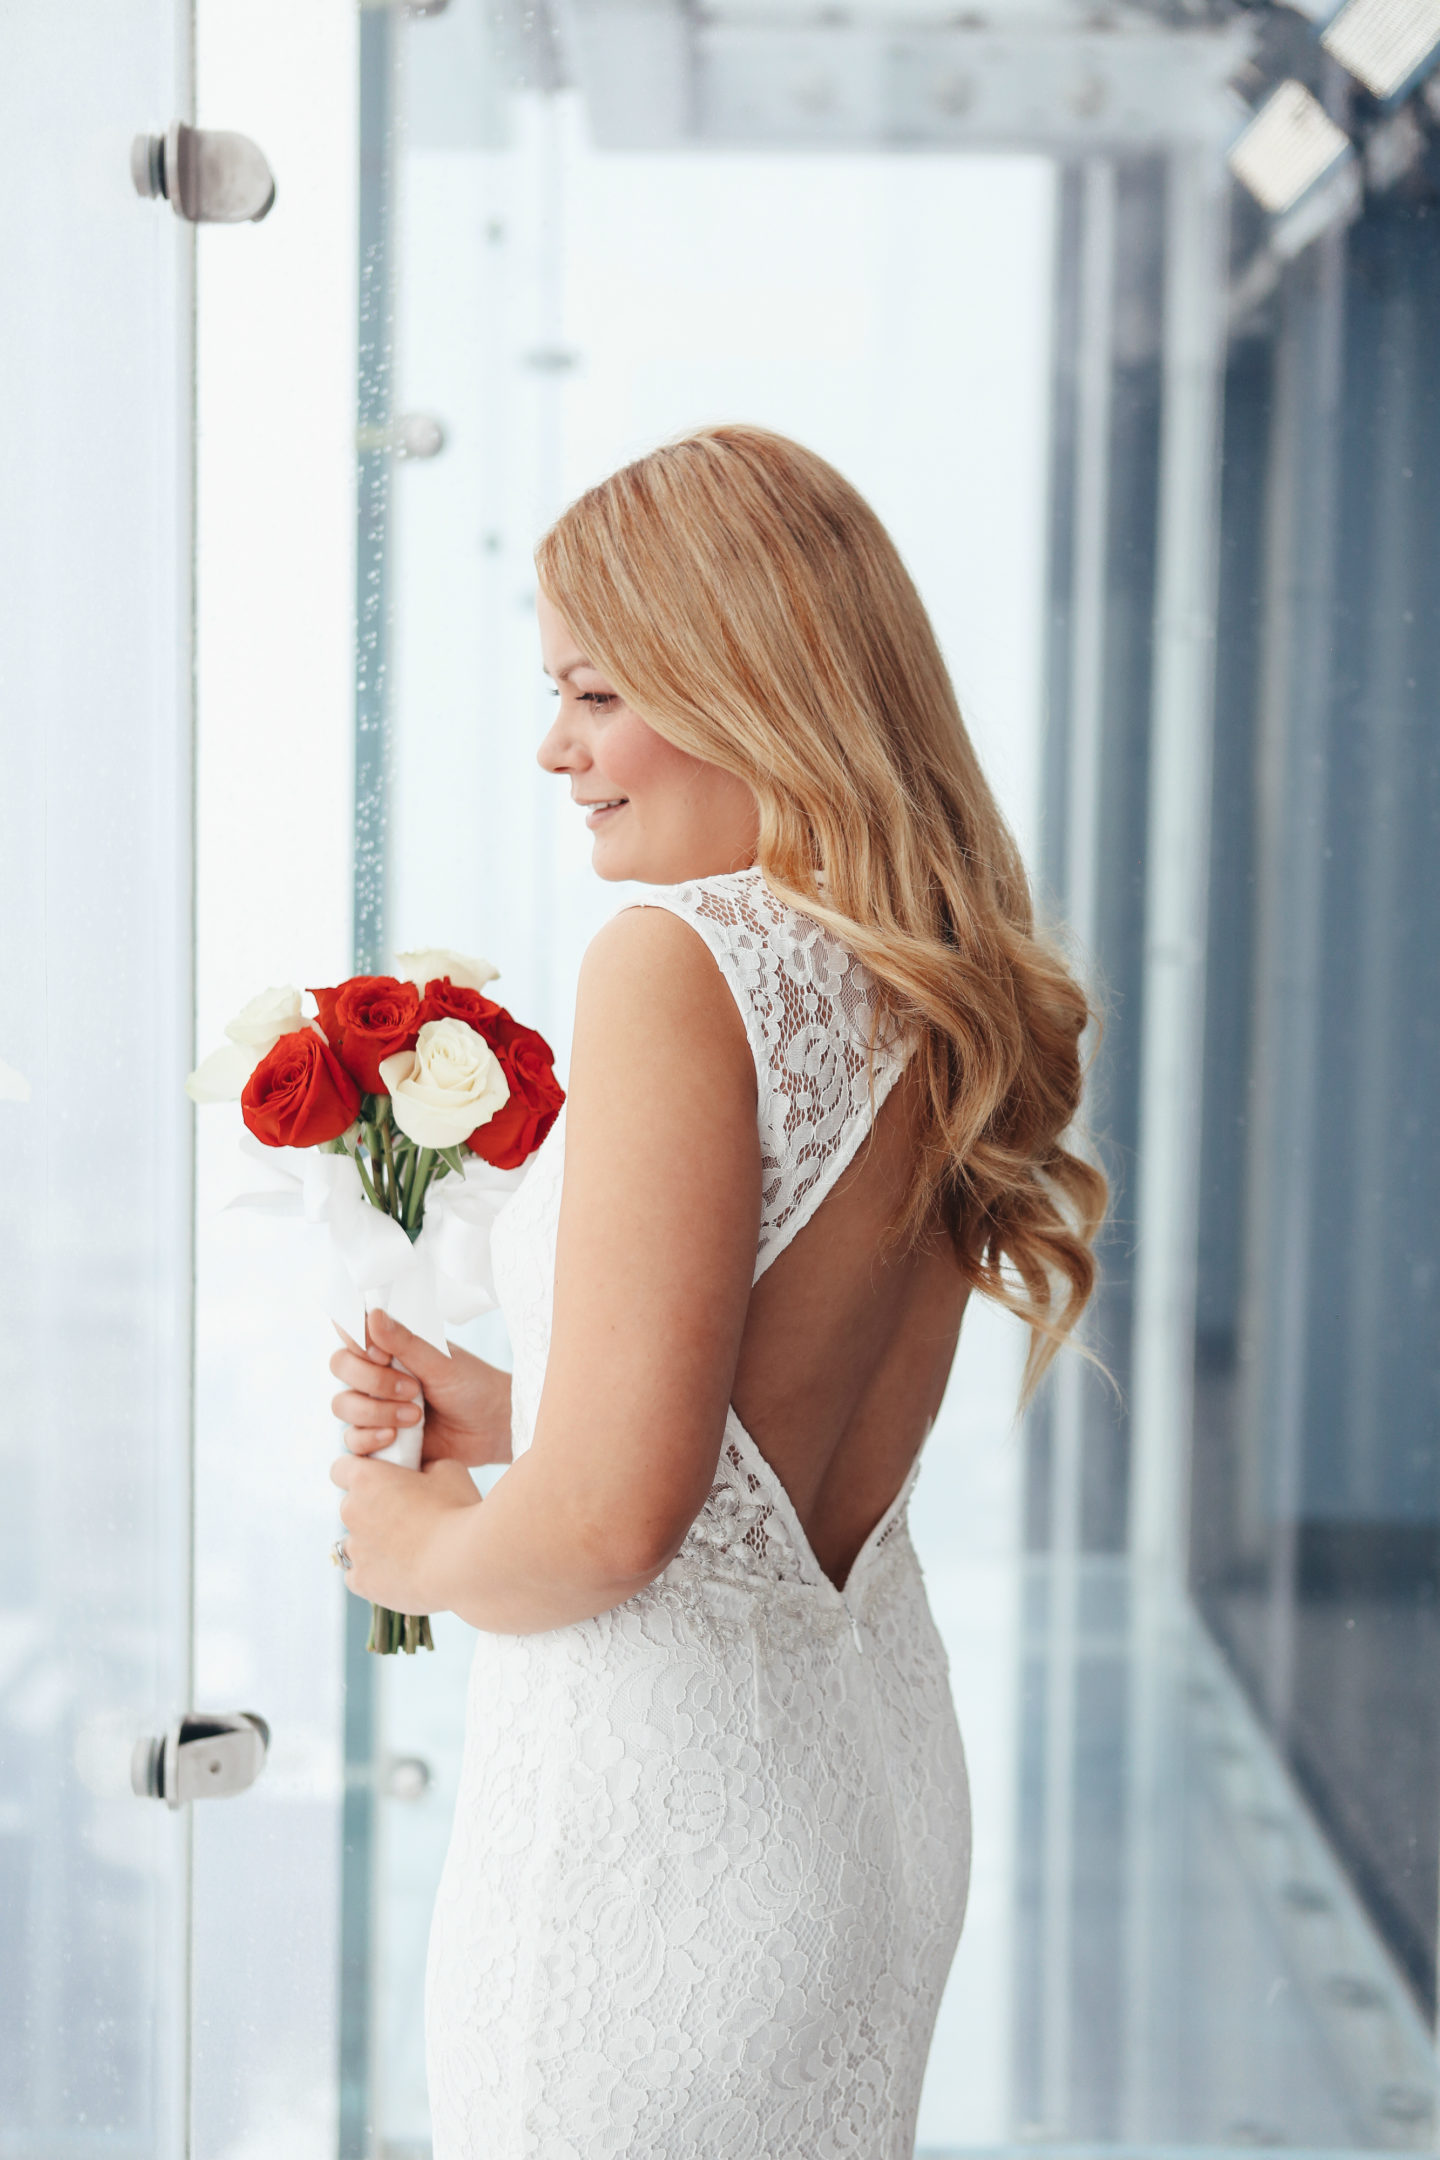  Vow-Renewal-Vanessa-Lambert-white-lace-dress-What-Would-V-Wear